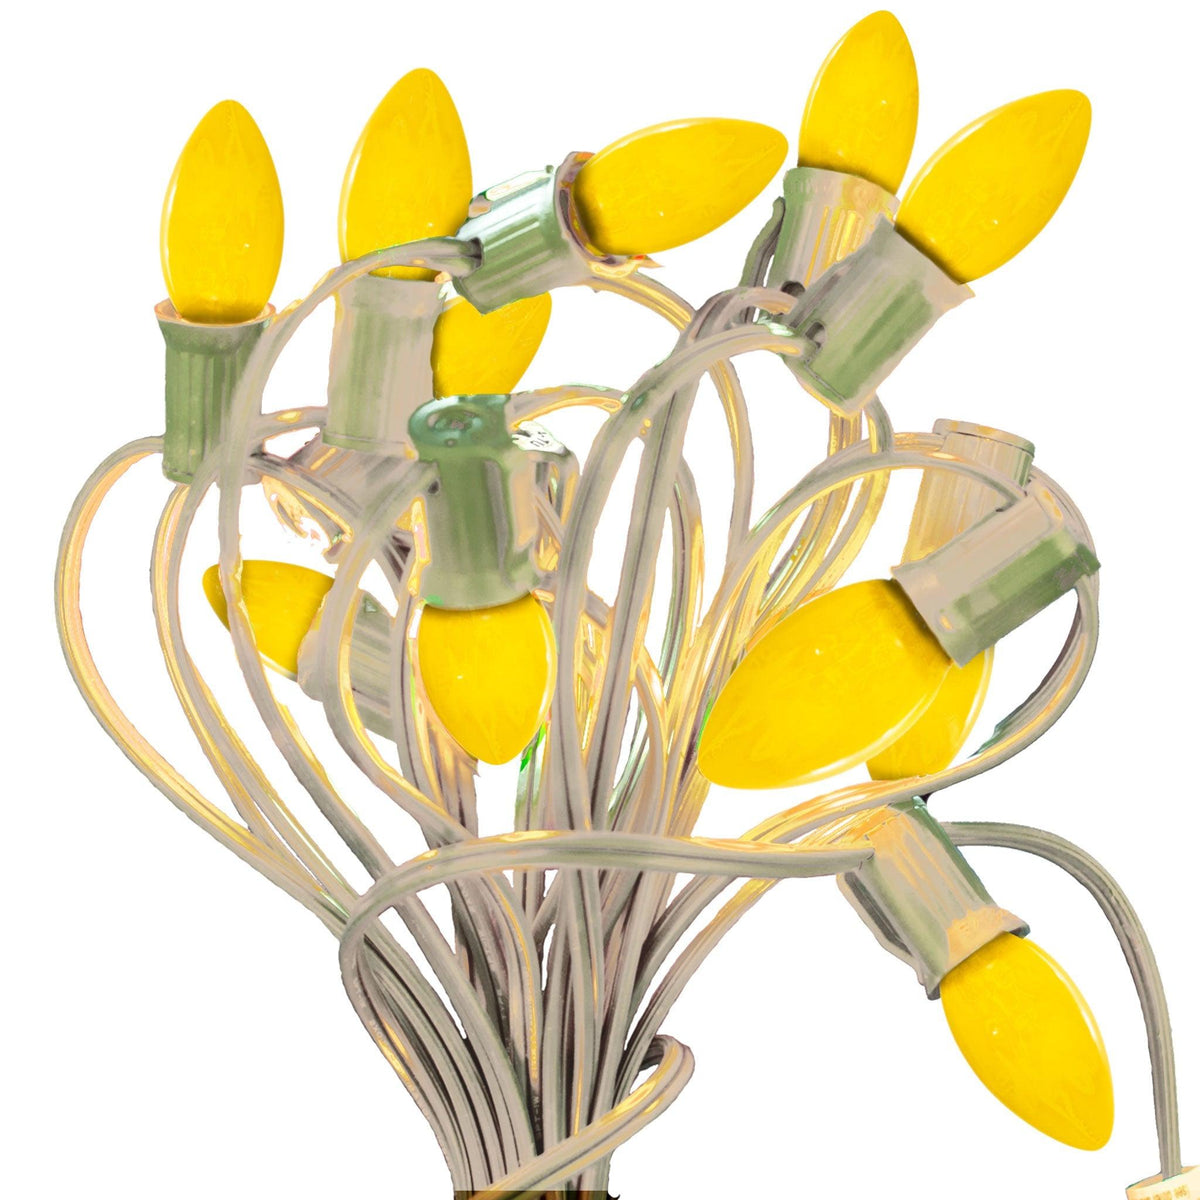 Solid Opaque Yellow Bulbs on a White Patio String Cord.  On sale by Lee Display in C7 and C9 bulb sizes with a 25ft cord.